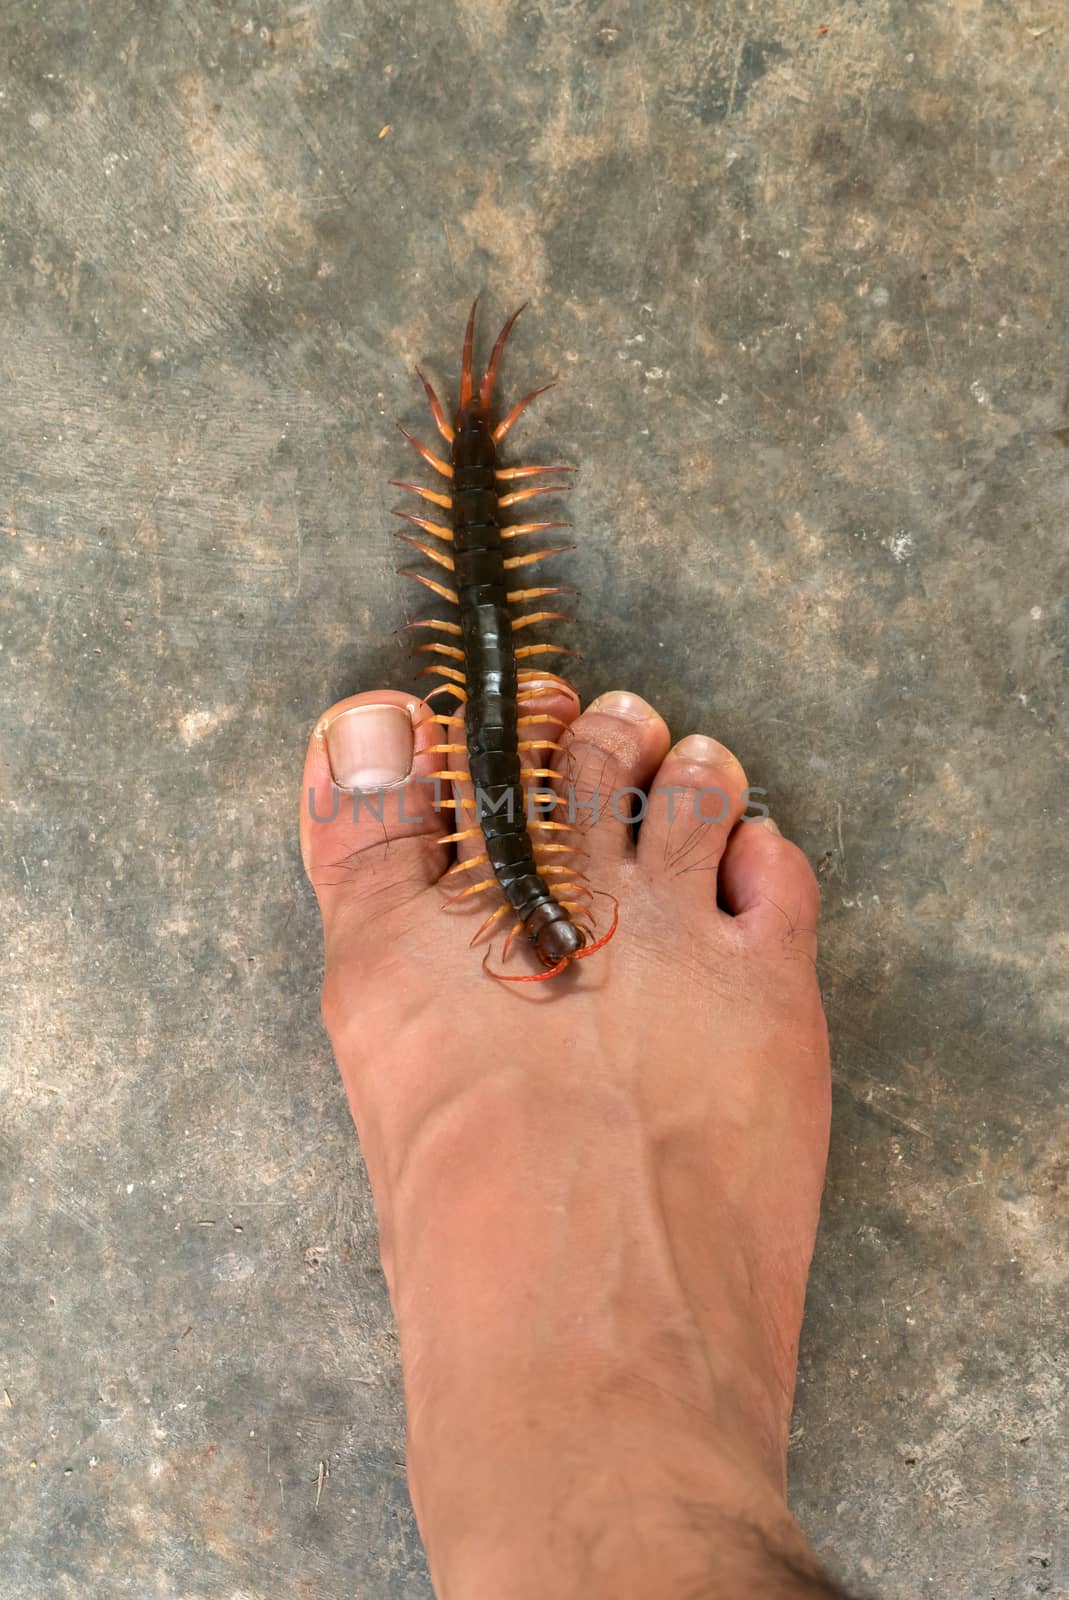 People were bitten by a centipede on their feet  by anankkml